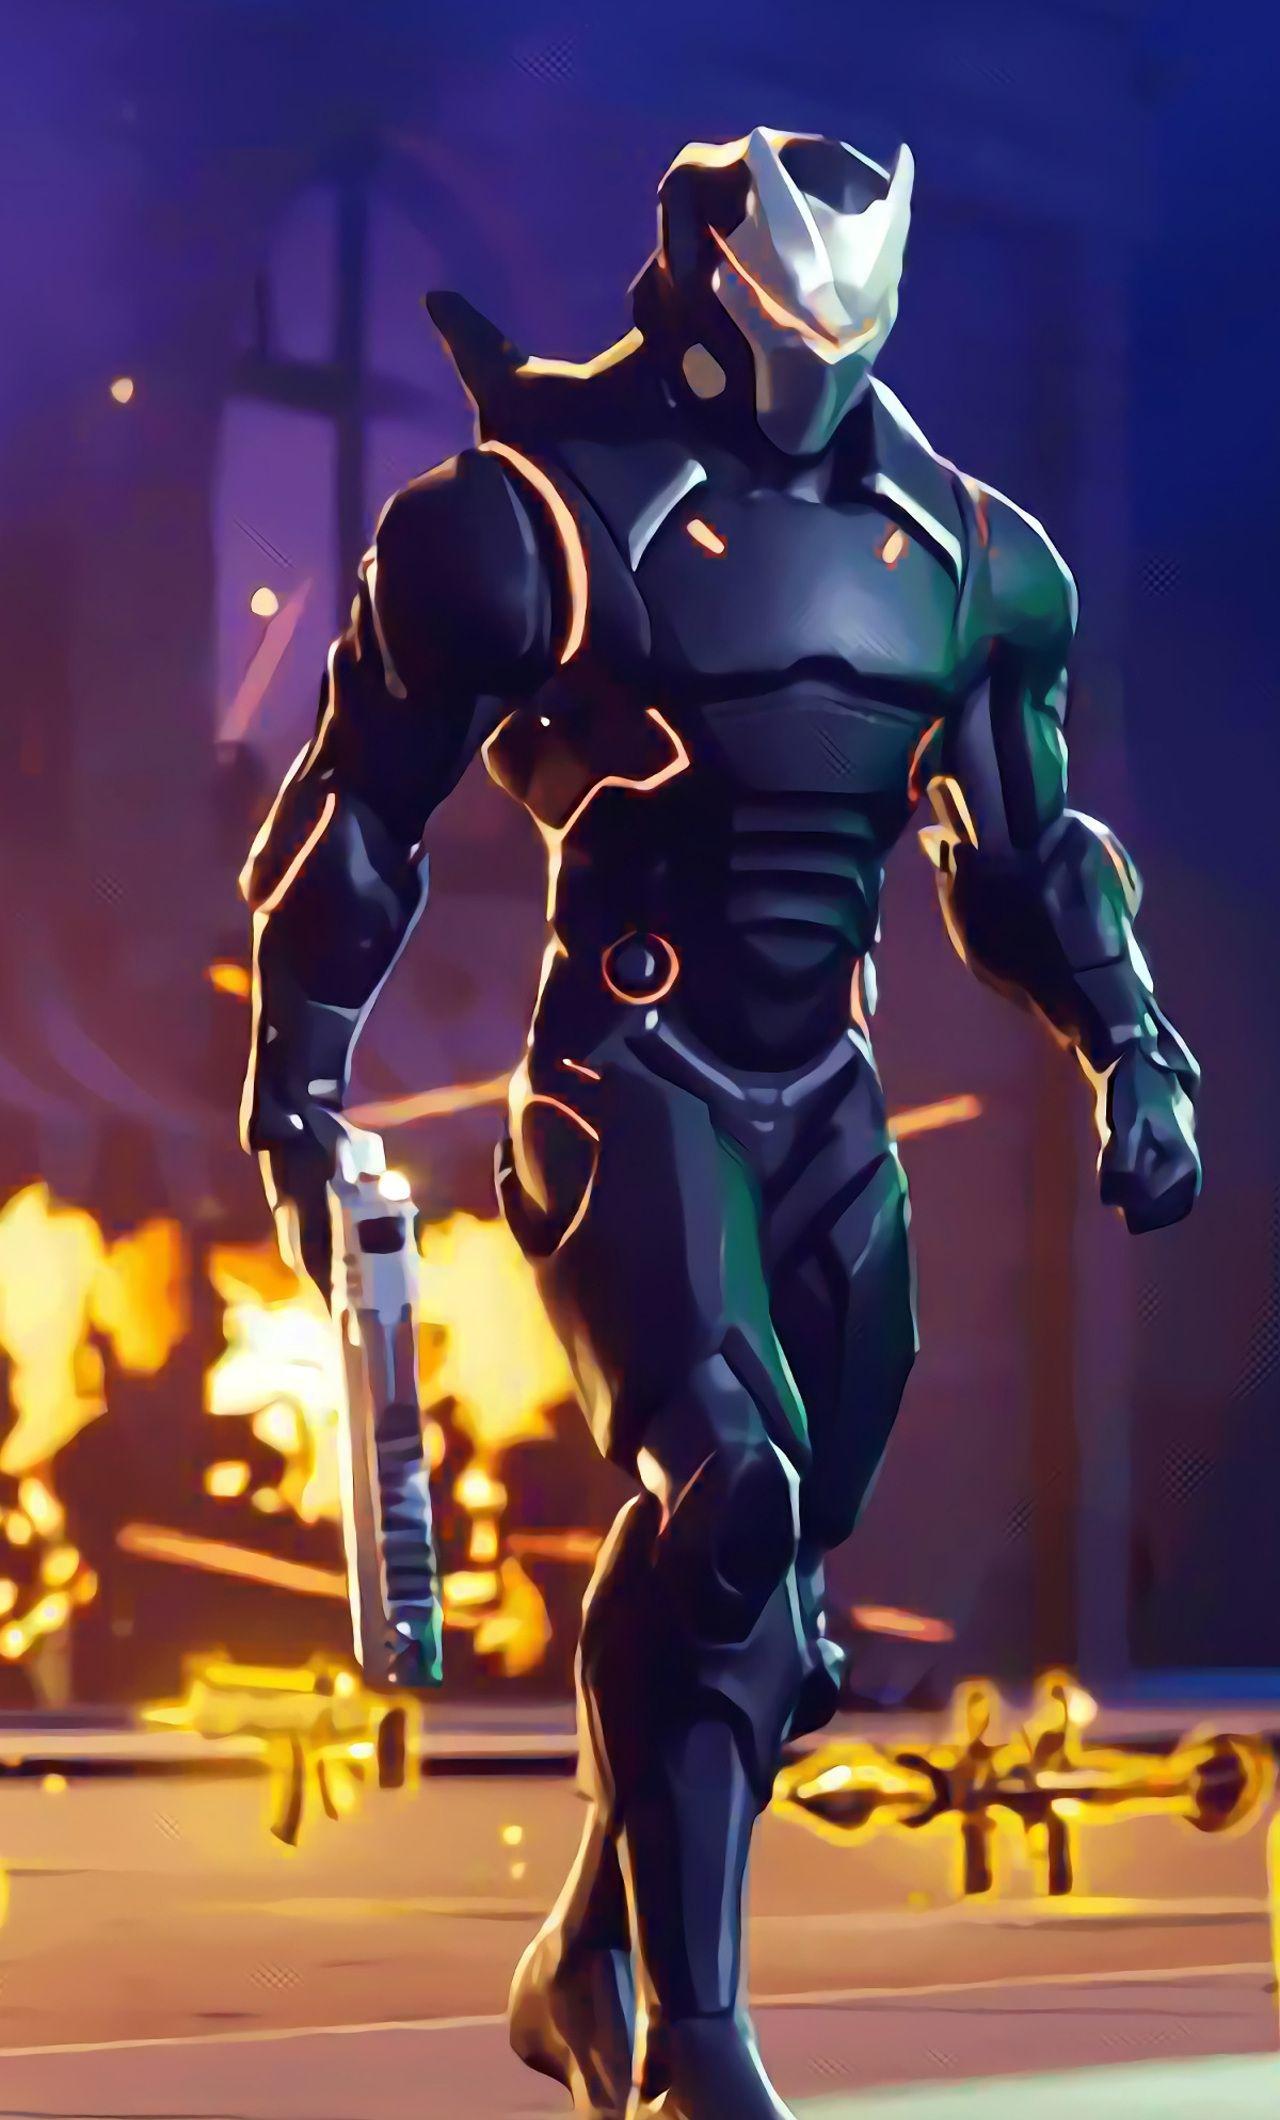 Phone Wallpaper for Fortnite Check more at httpsphonewallpcomphone wallpaperforfortnite  Fortnite Gaming wallpapers Best gaming  wallpapers